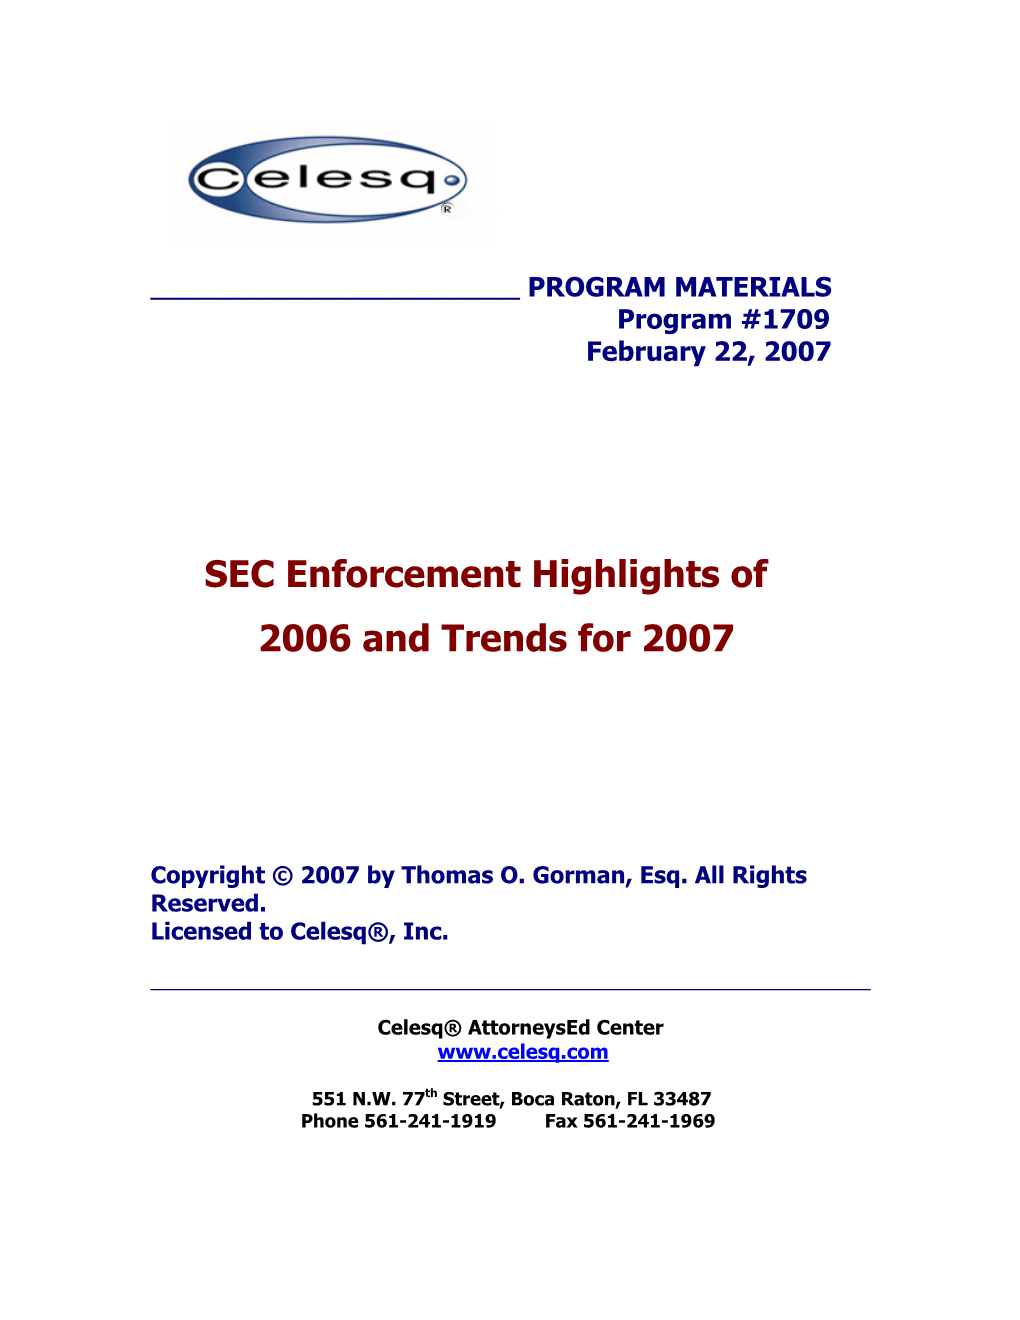 SEC Enforcement Highlights of 2006 and Trends for 2007